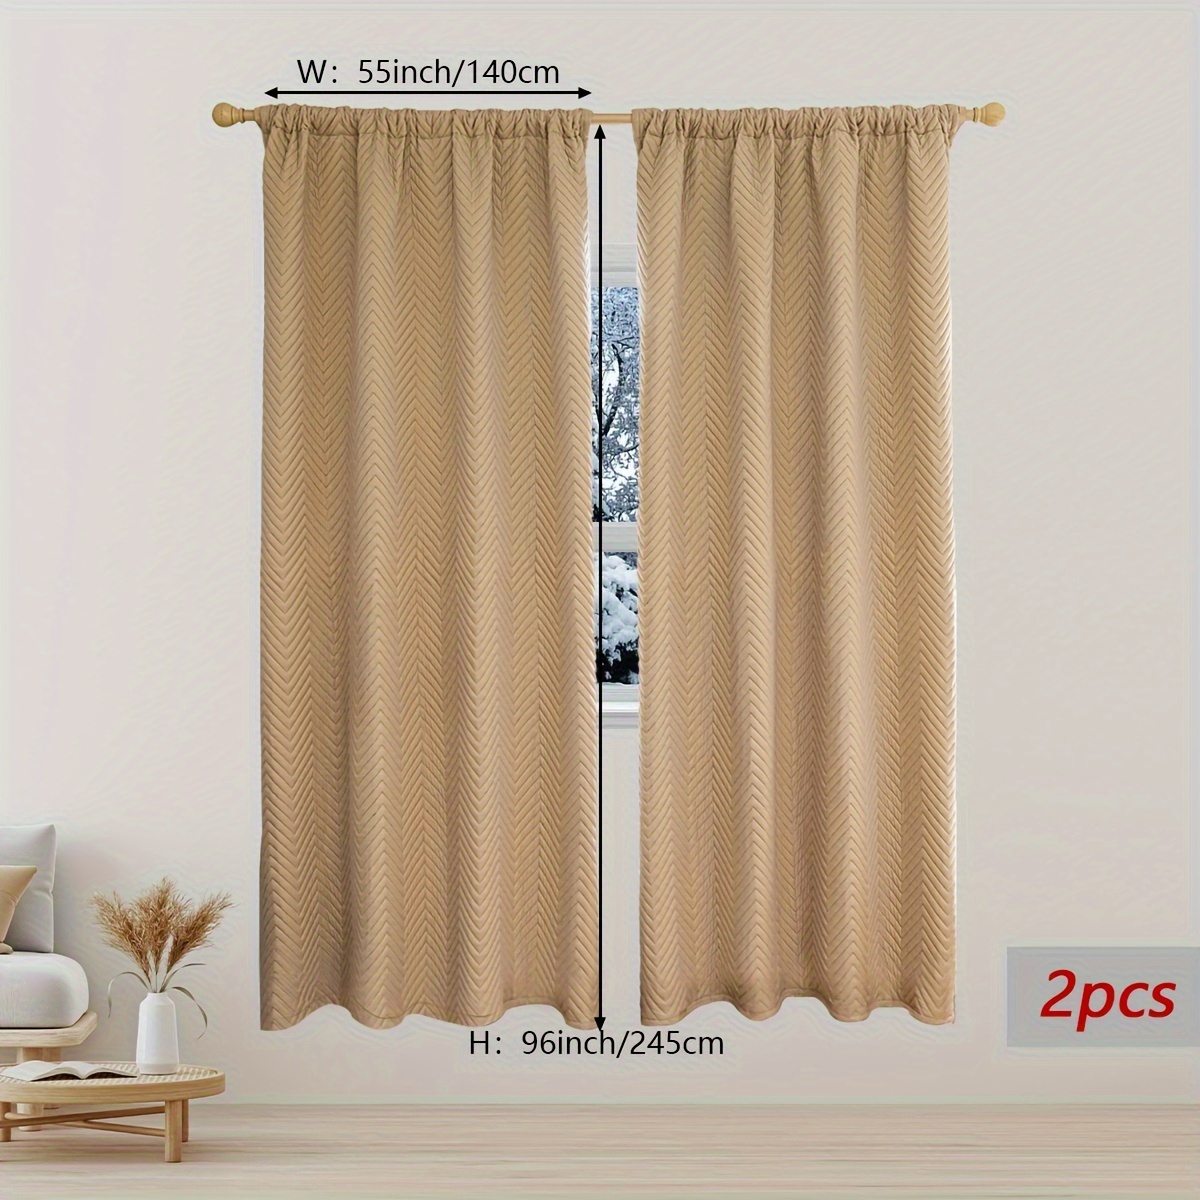 Hight Quality Winter Cotton Door Curtain Wind Proof Sound